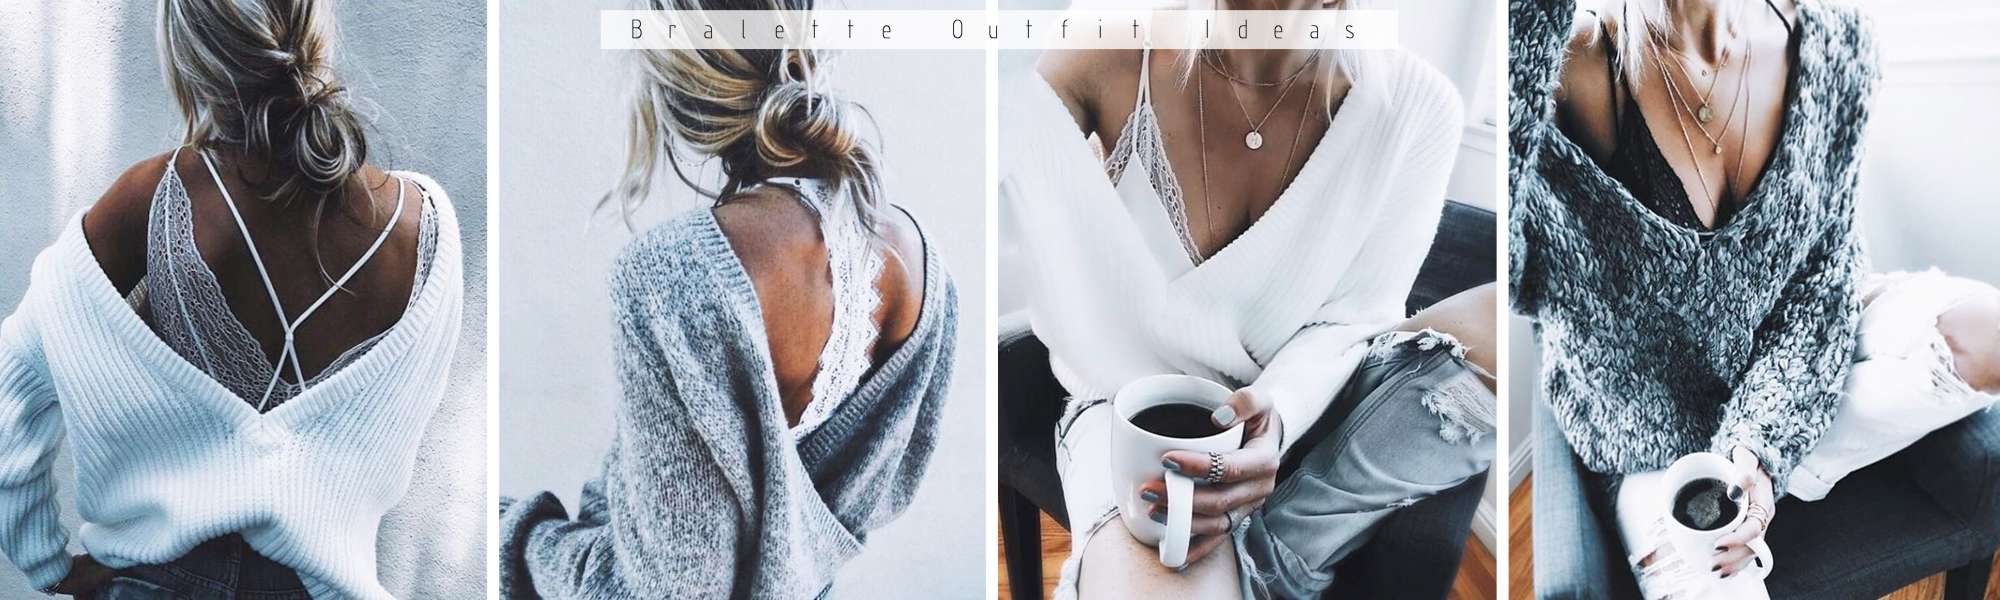 Sexy yet Classy Outfit Ideas for Bralette! - Fasheholic